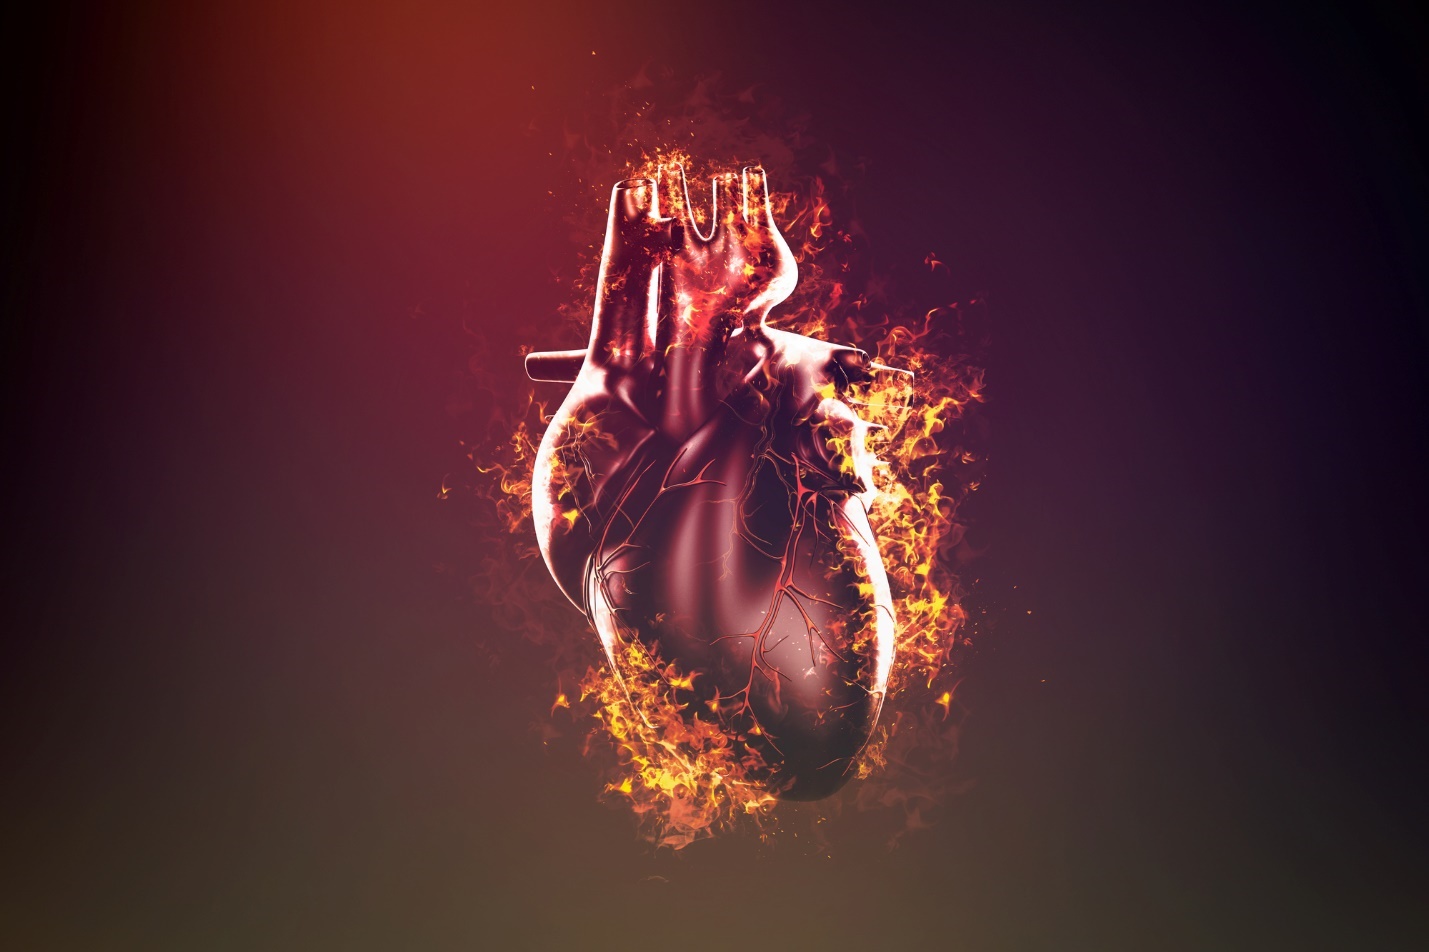 A human heart in fire

Description automatically generated